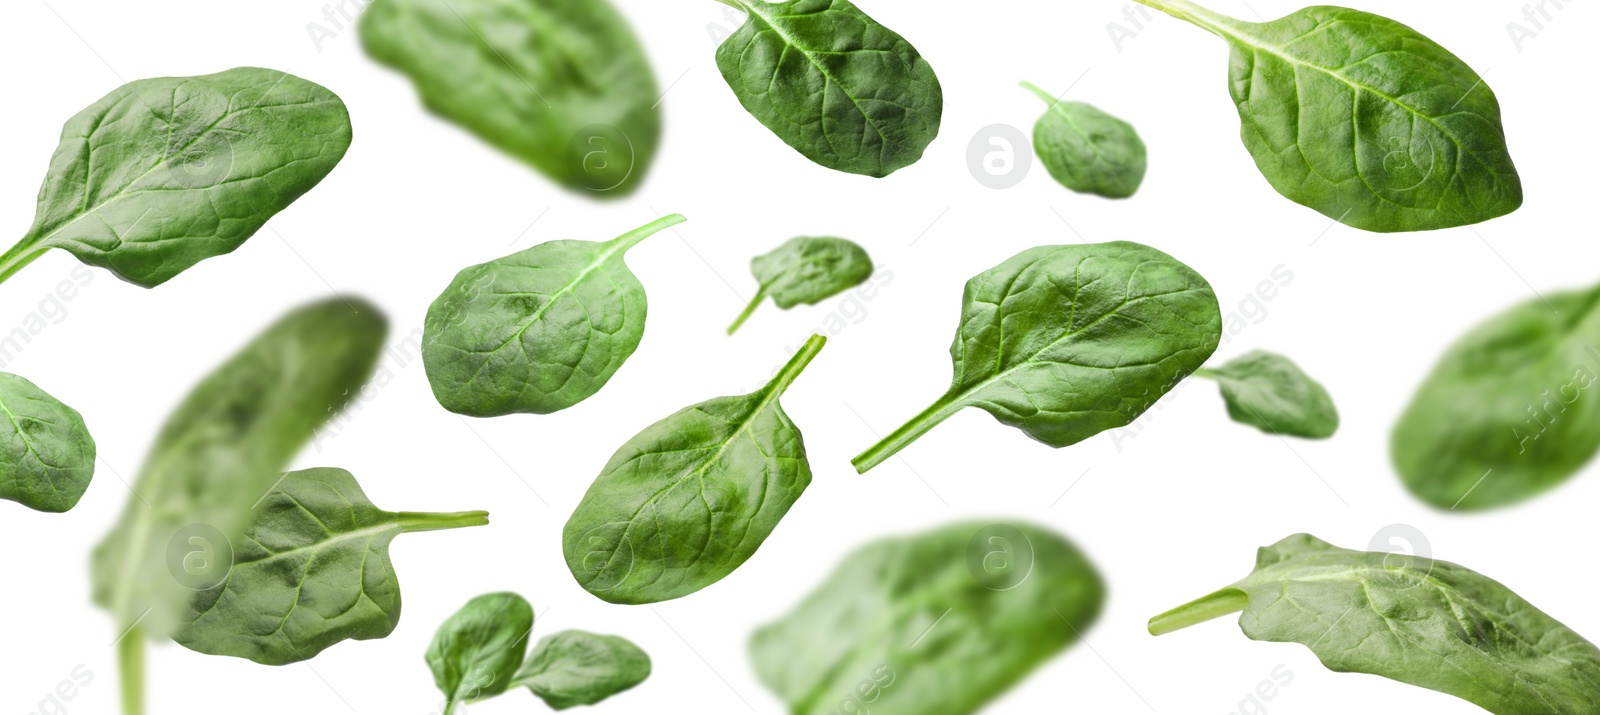 Image of Fresh green spinach leaves falling on white background